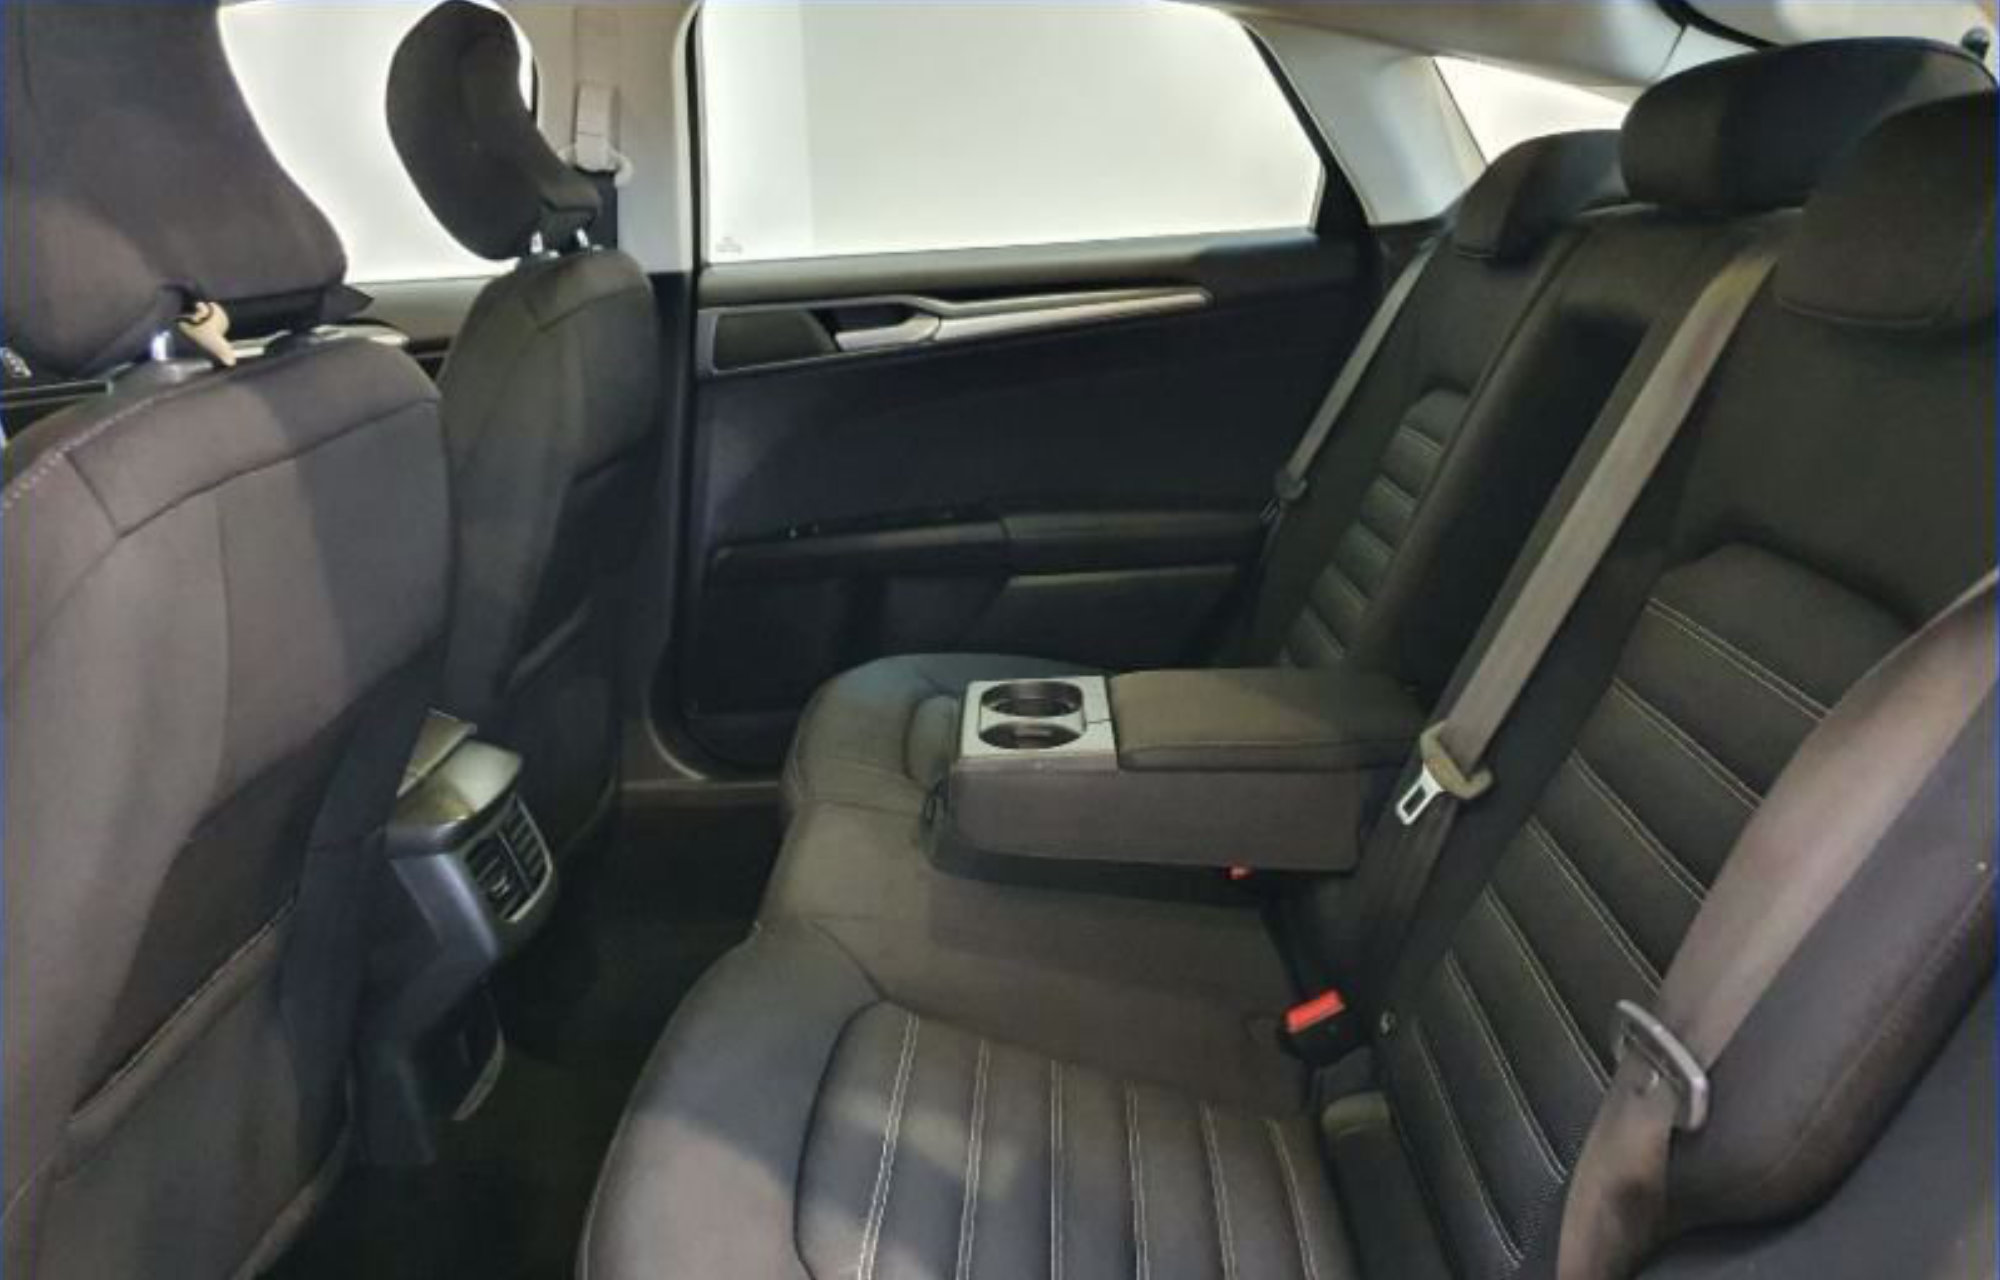 Ford Mondeo back seats